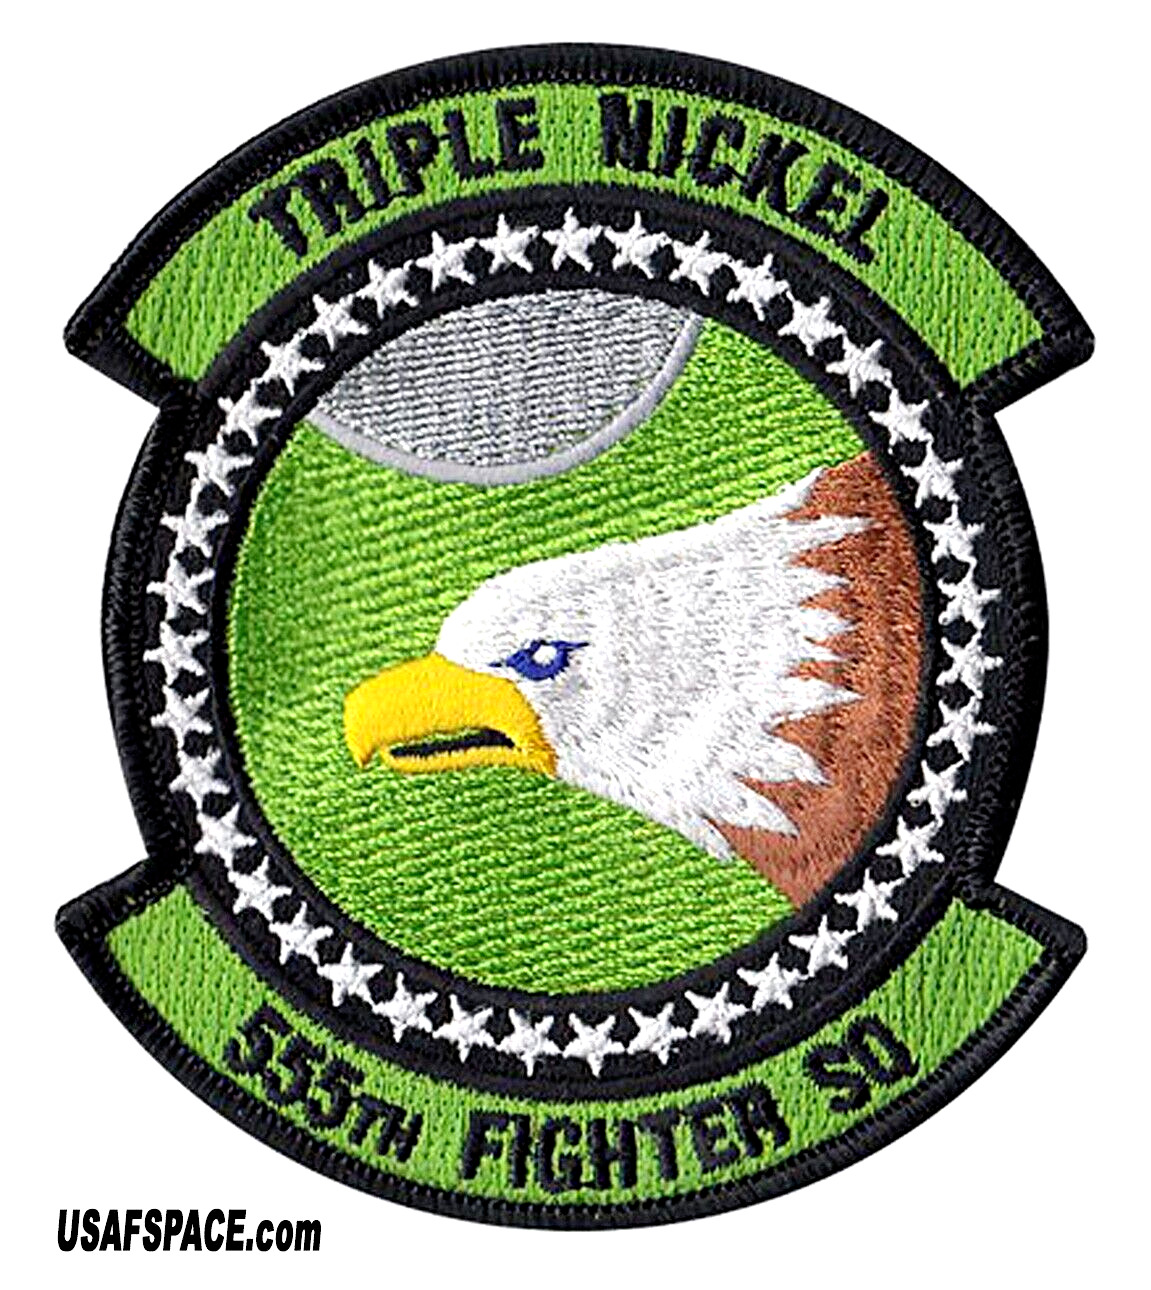 USAF 555TH FIGHTER SQ-555 FS-TRIPLE NICKEL-F-16-Aviano Air Base, Italy-VEL PATCH